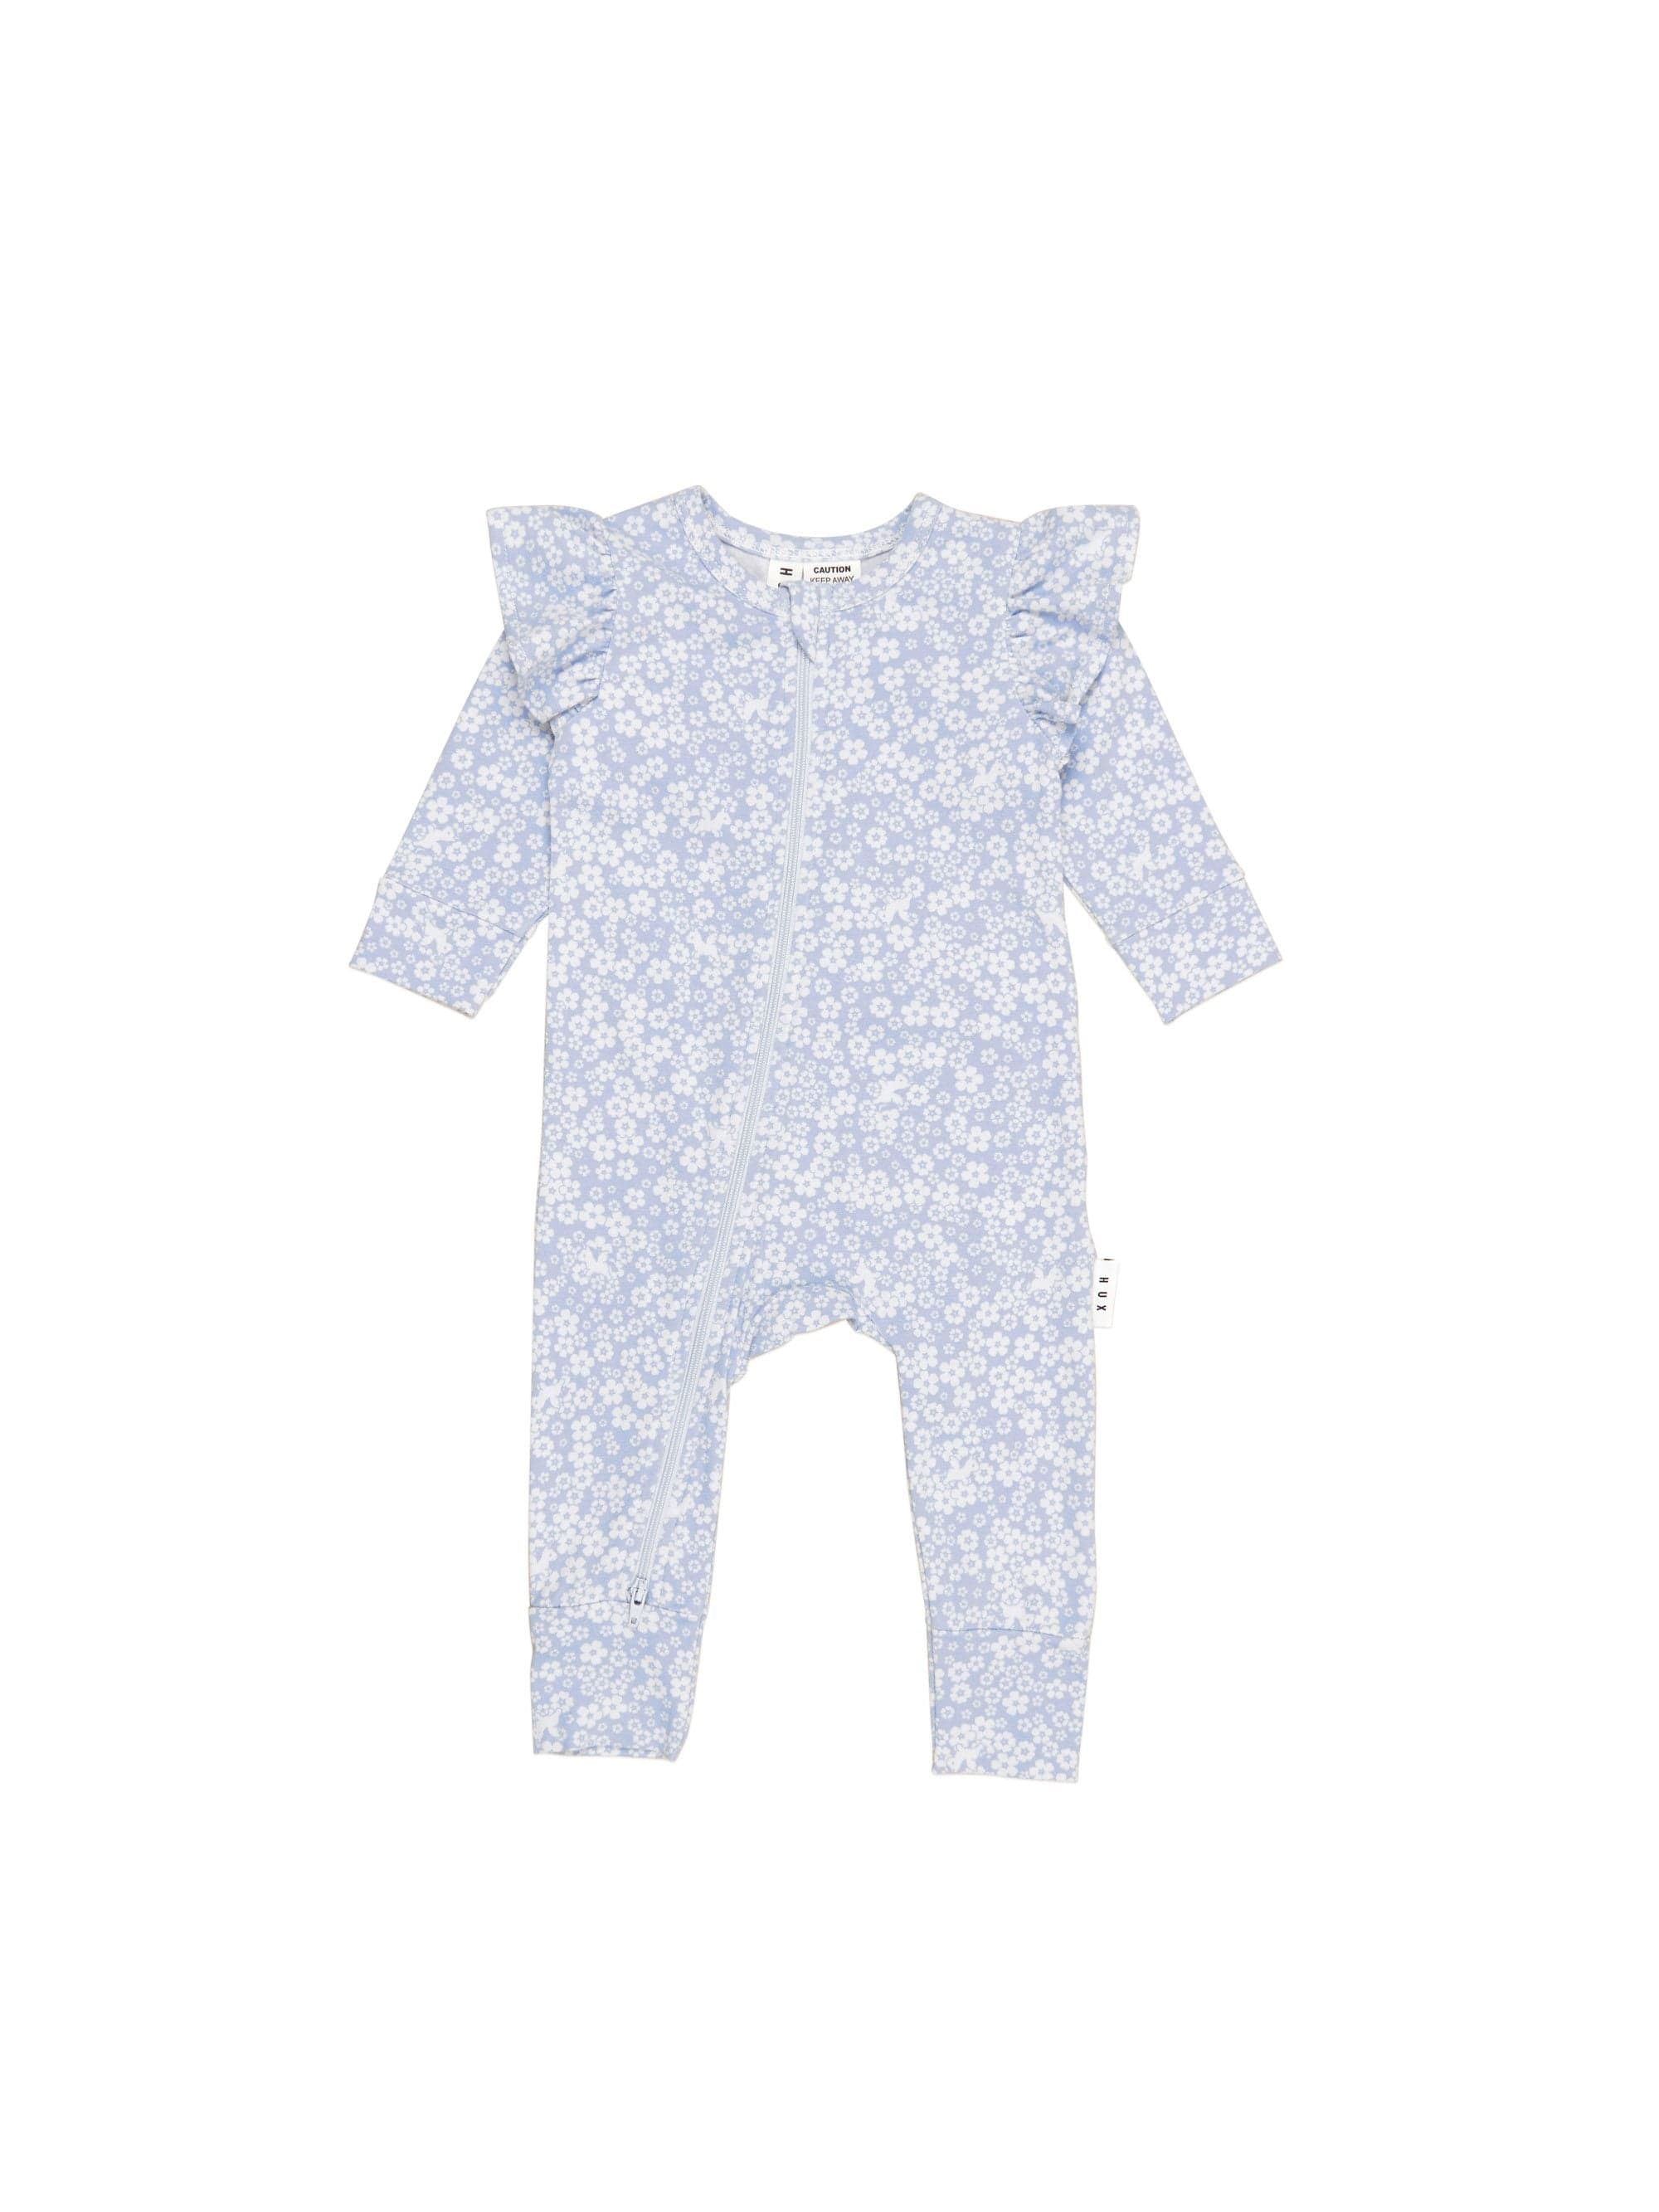 Huxbaby Girls All In One Unicorn Surprise Frill Romper